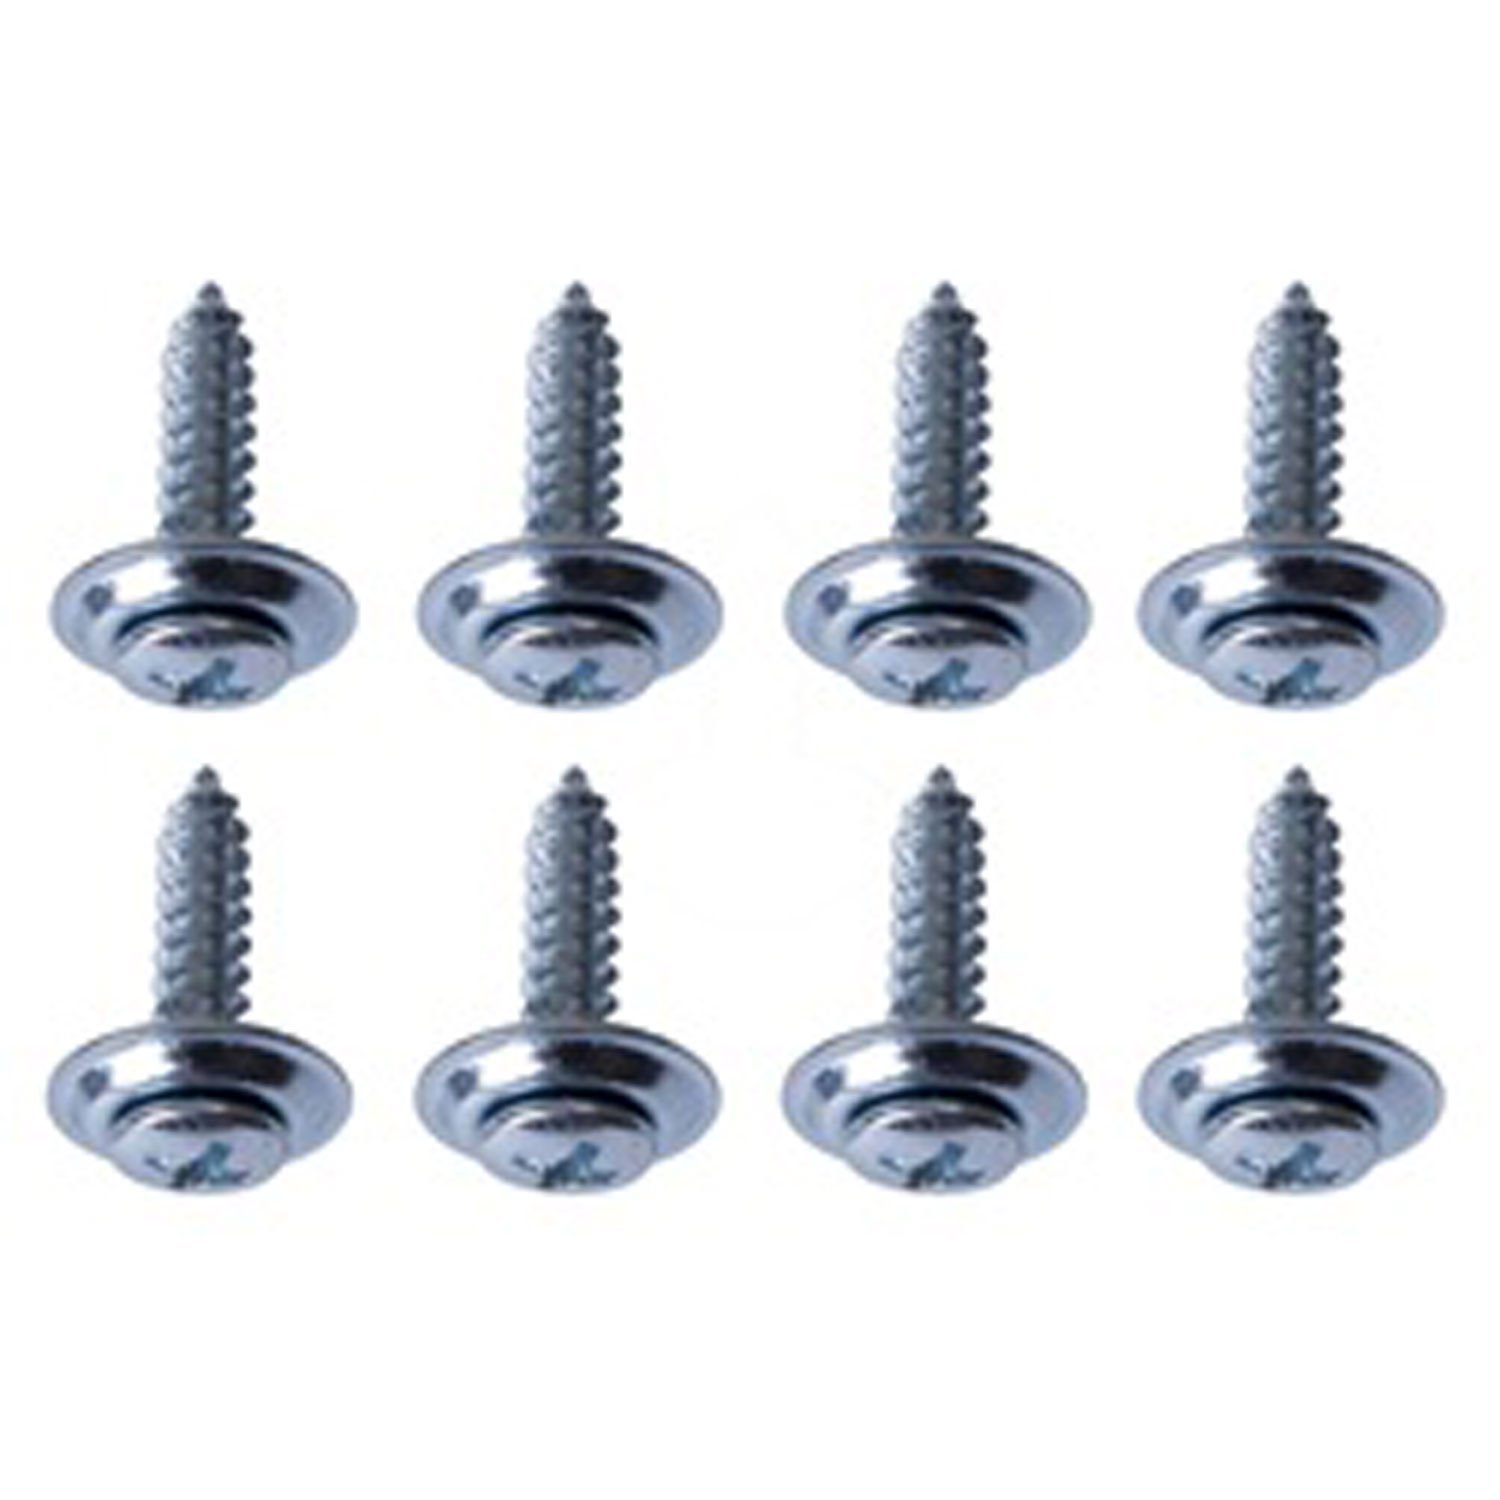 This dash pad screw kit from Omix-ADA allows